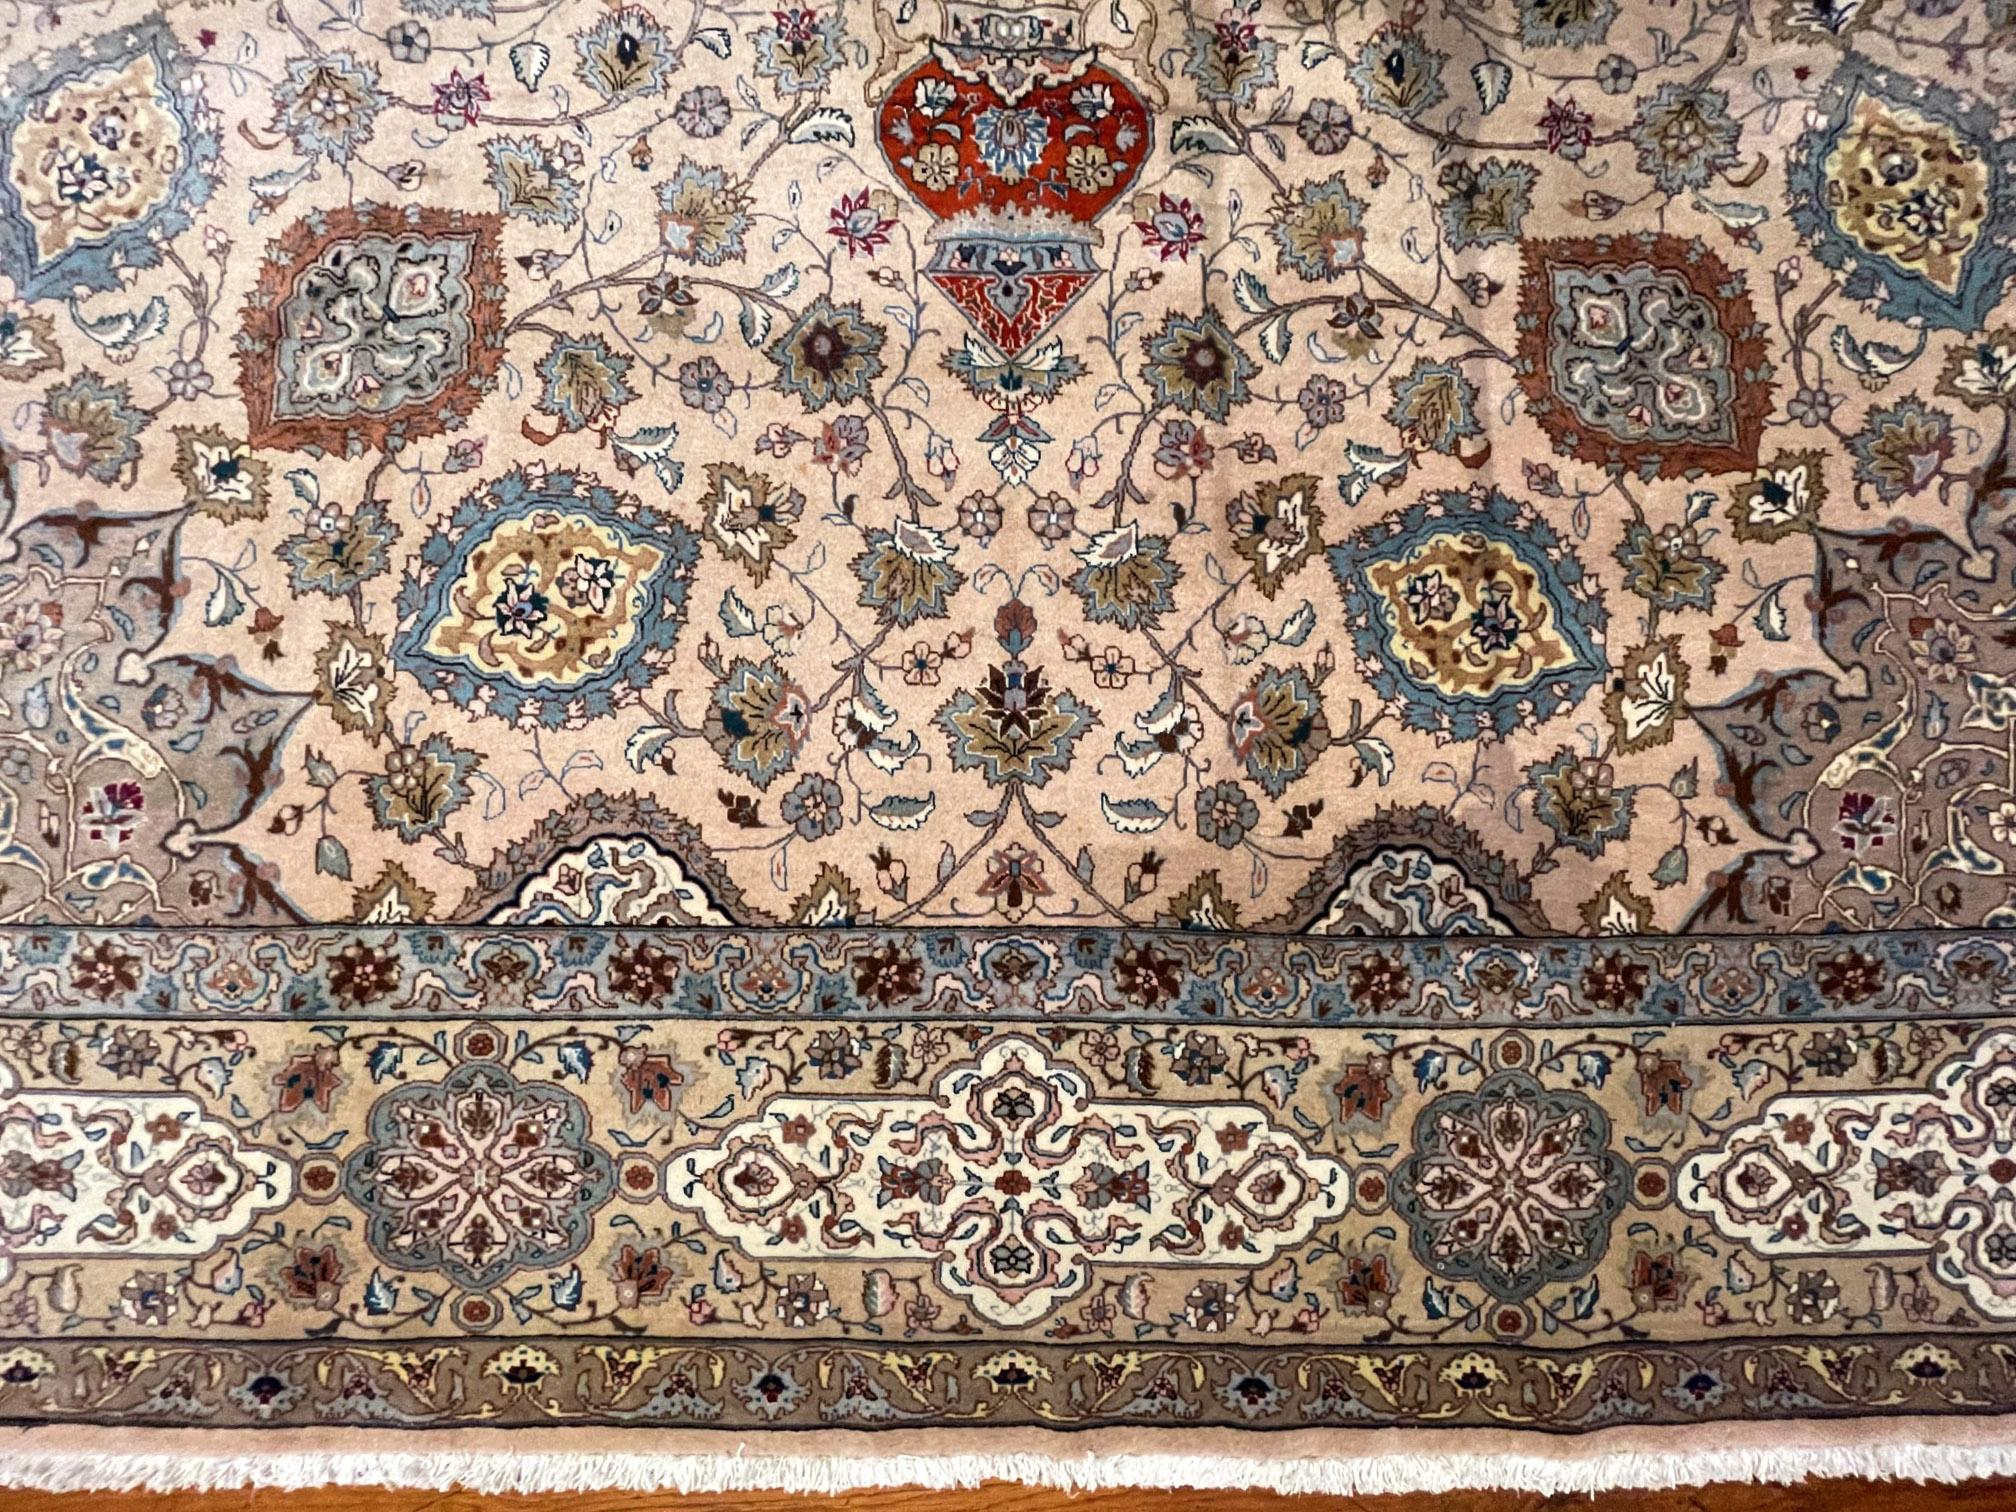 Authentic Persian Hand Knotted Floral Sheikh Safi Design Tabriz Rug, 1970 For Sale 3